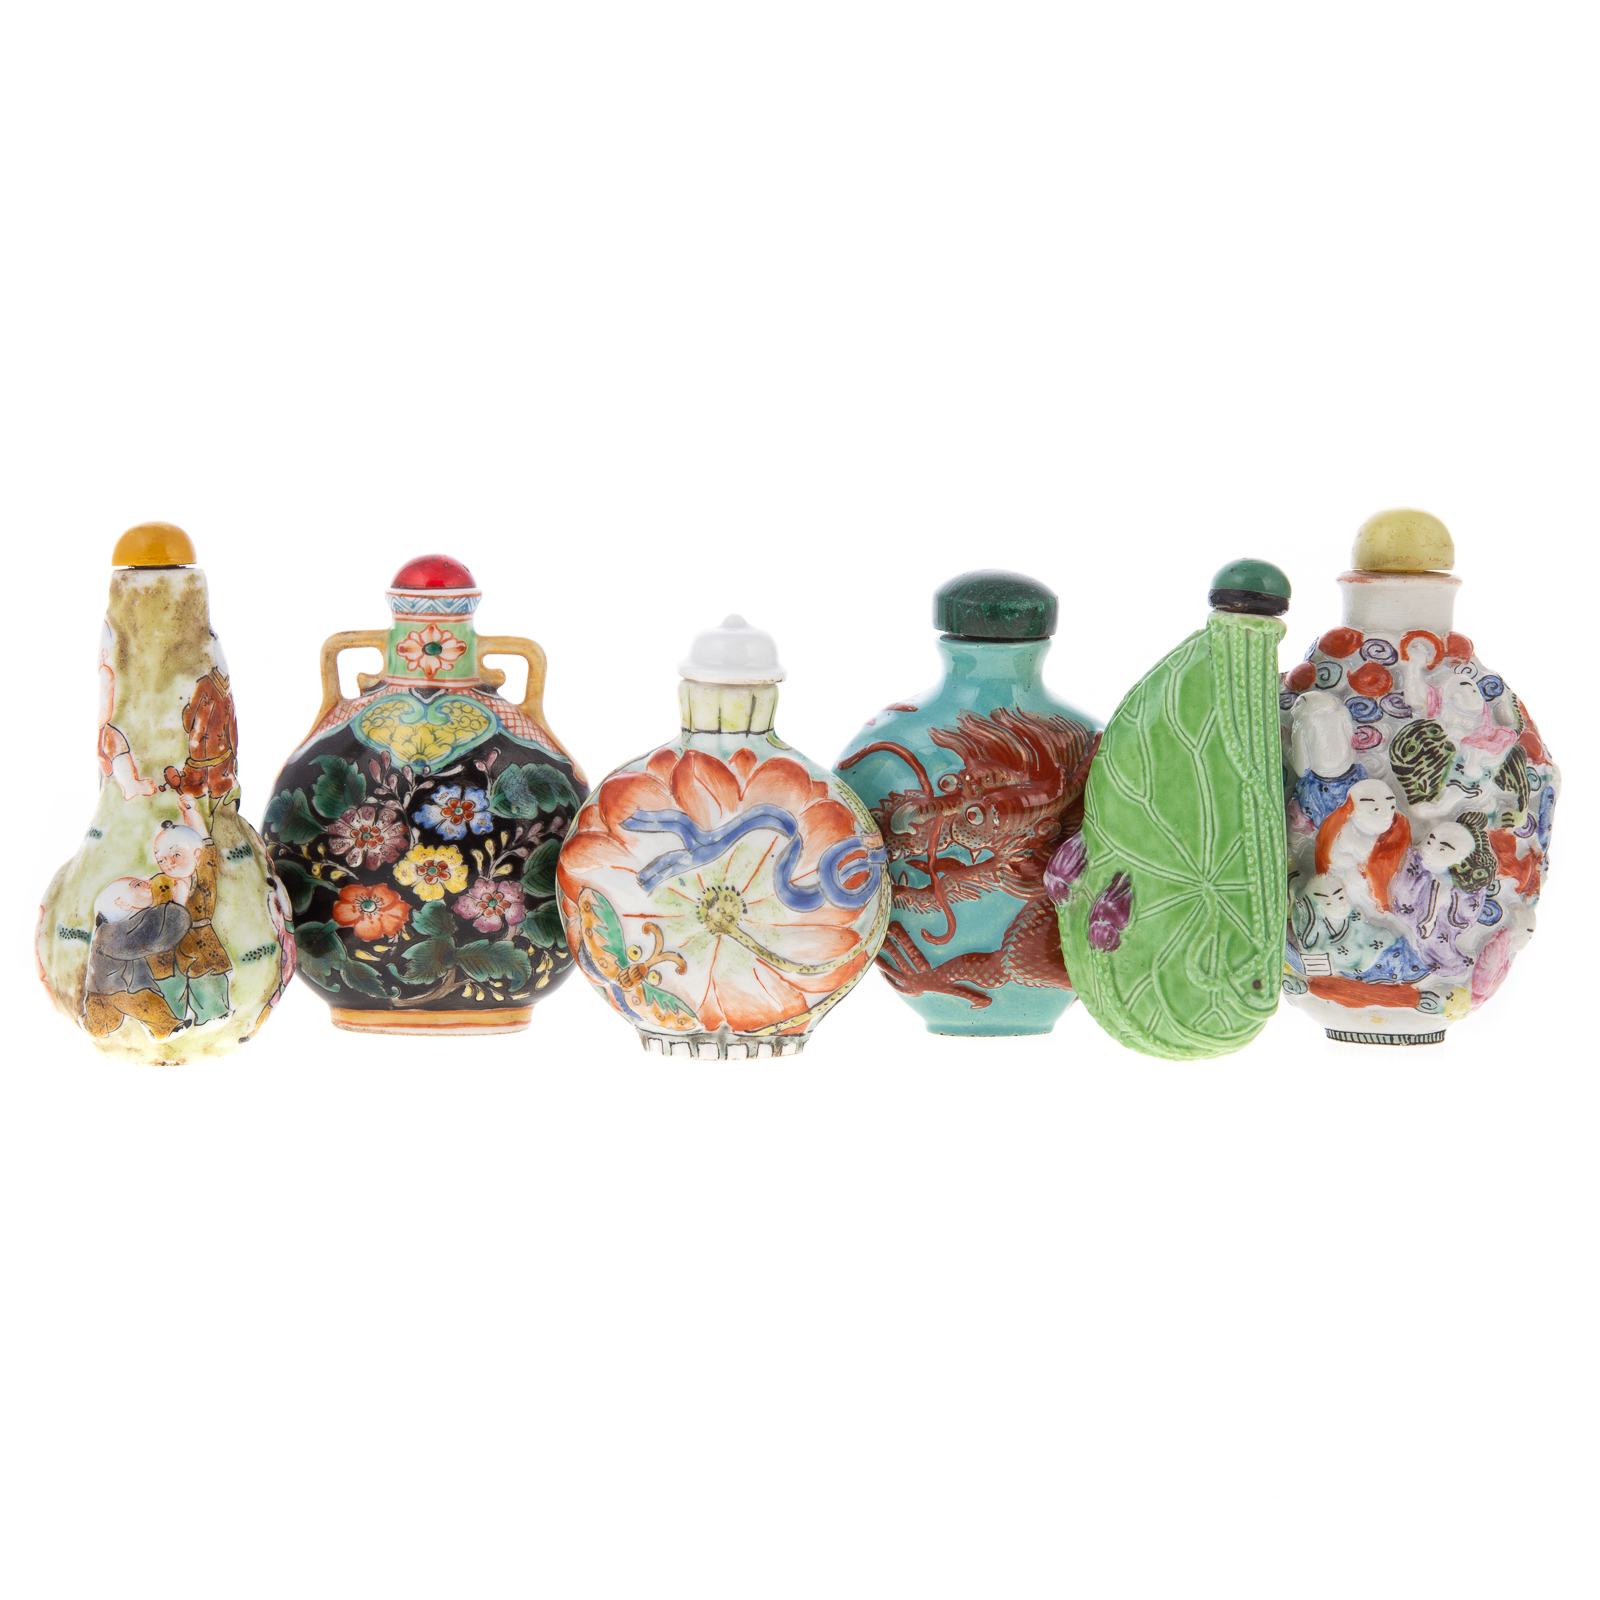 SIX CHINESE PORCELAIN SNUFF BOTTLES